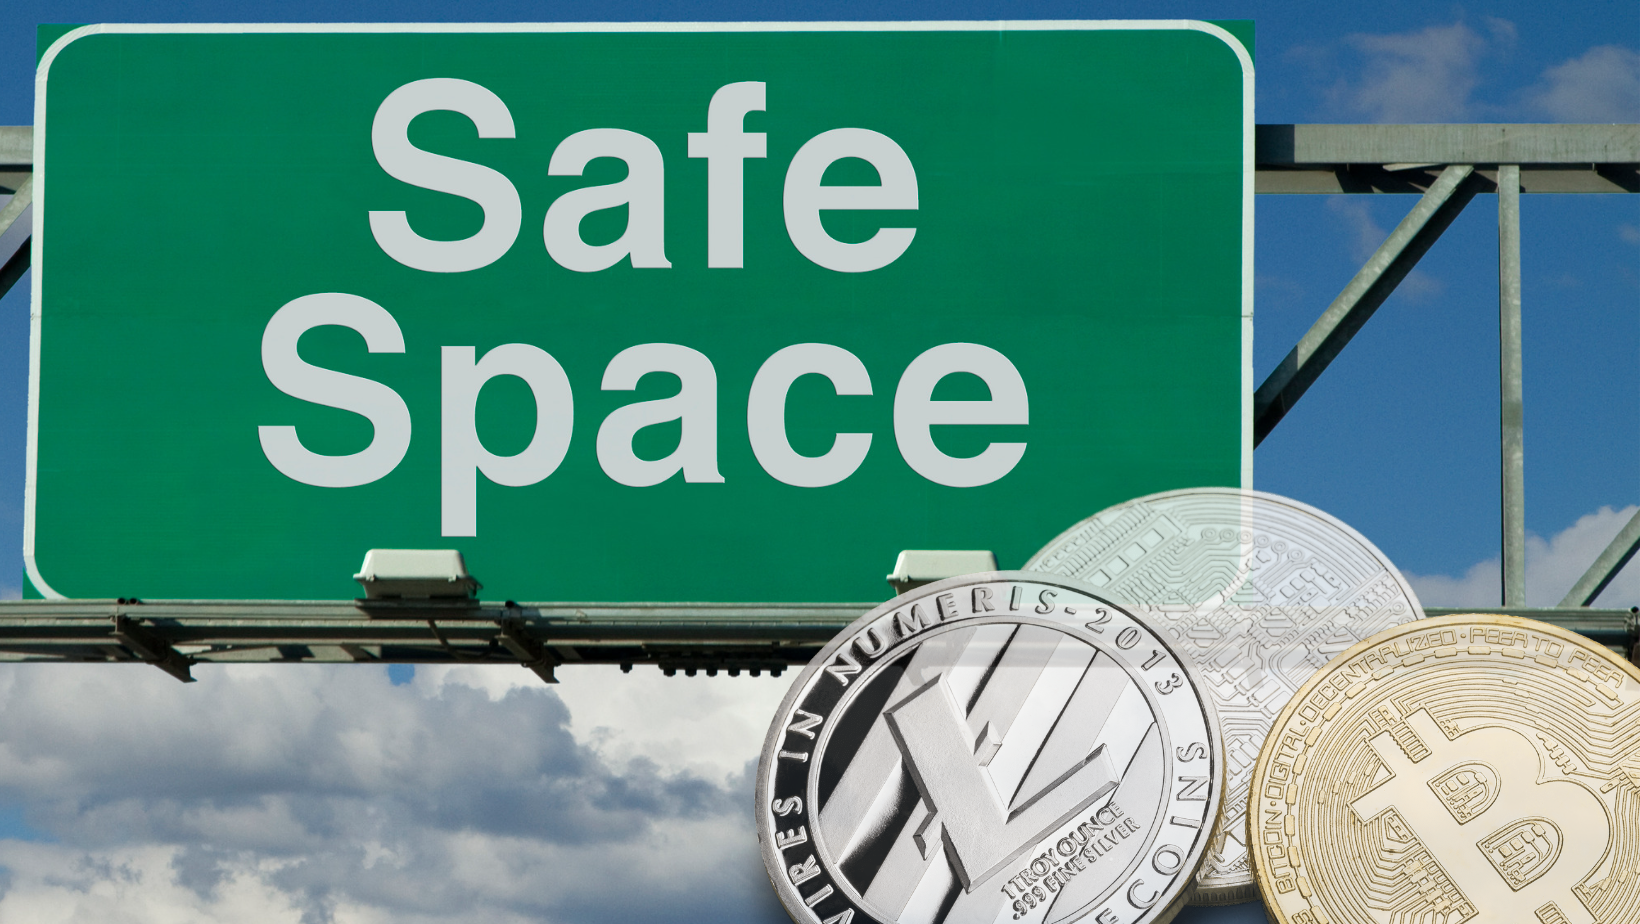 sign that says "safe space" and various crypto coins